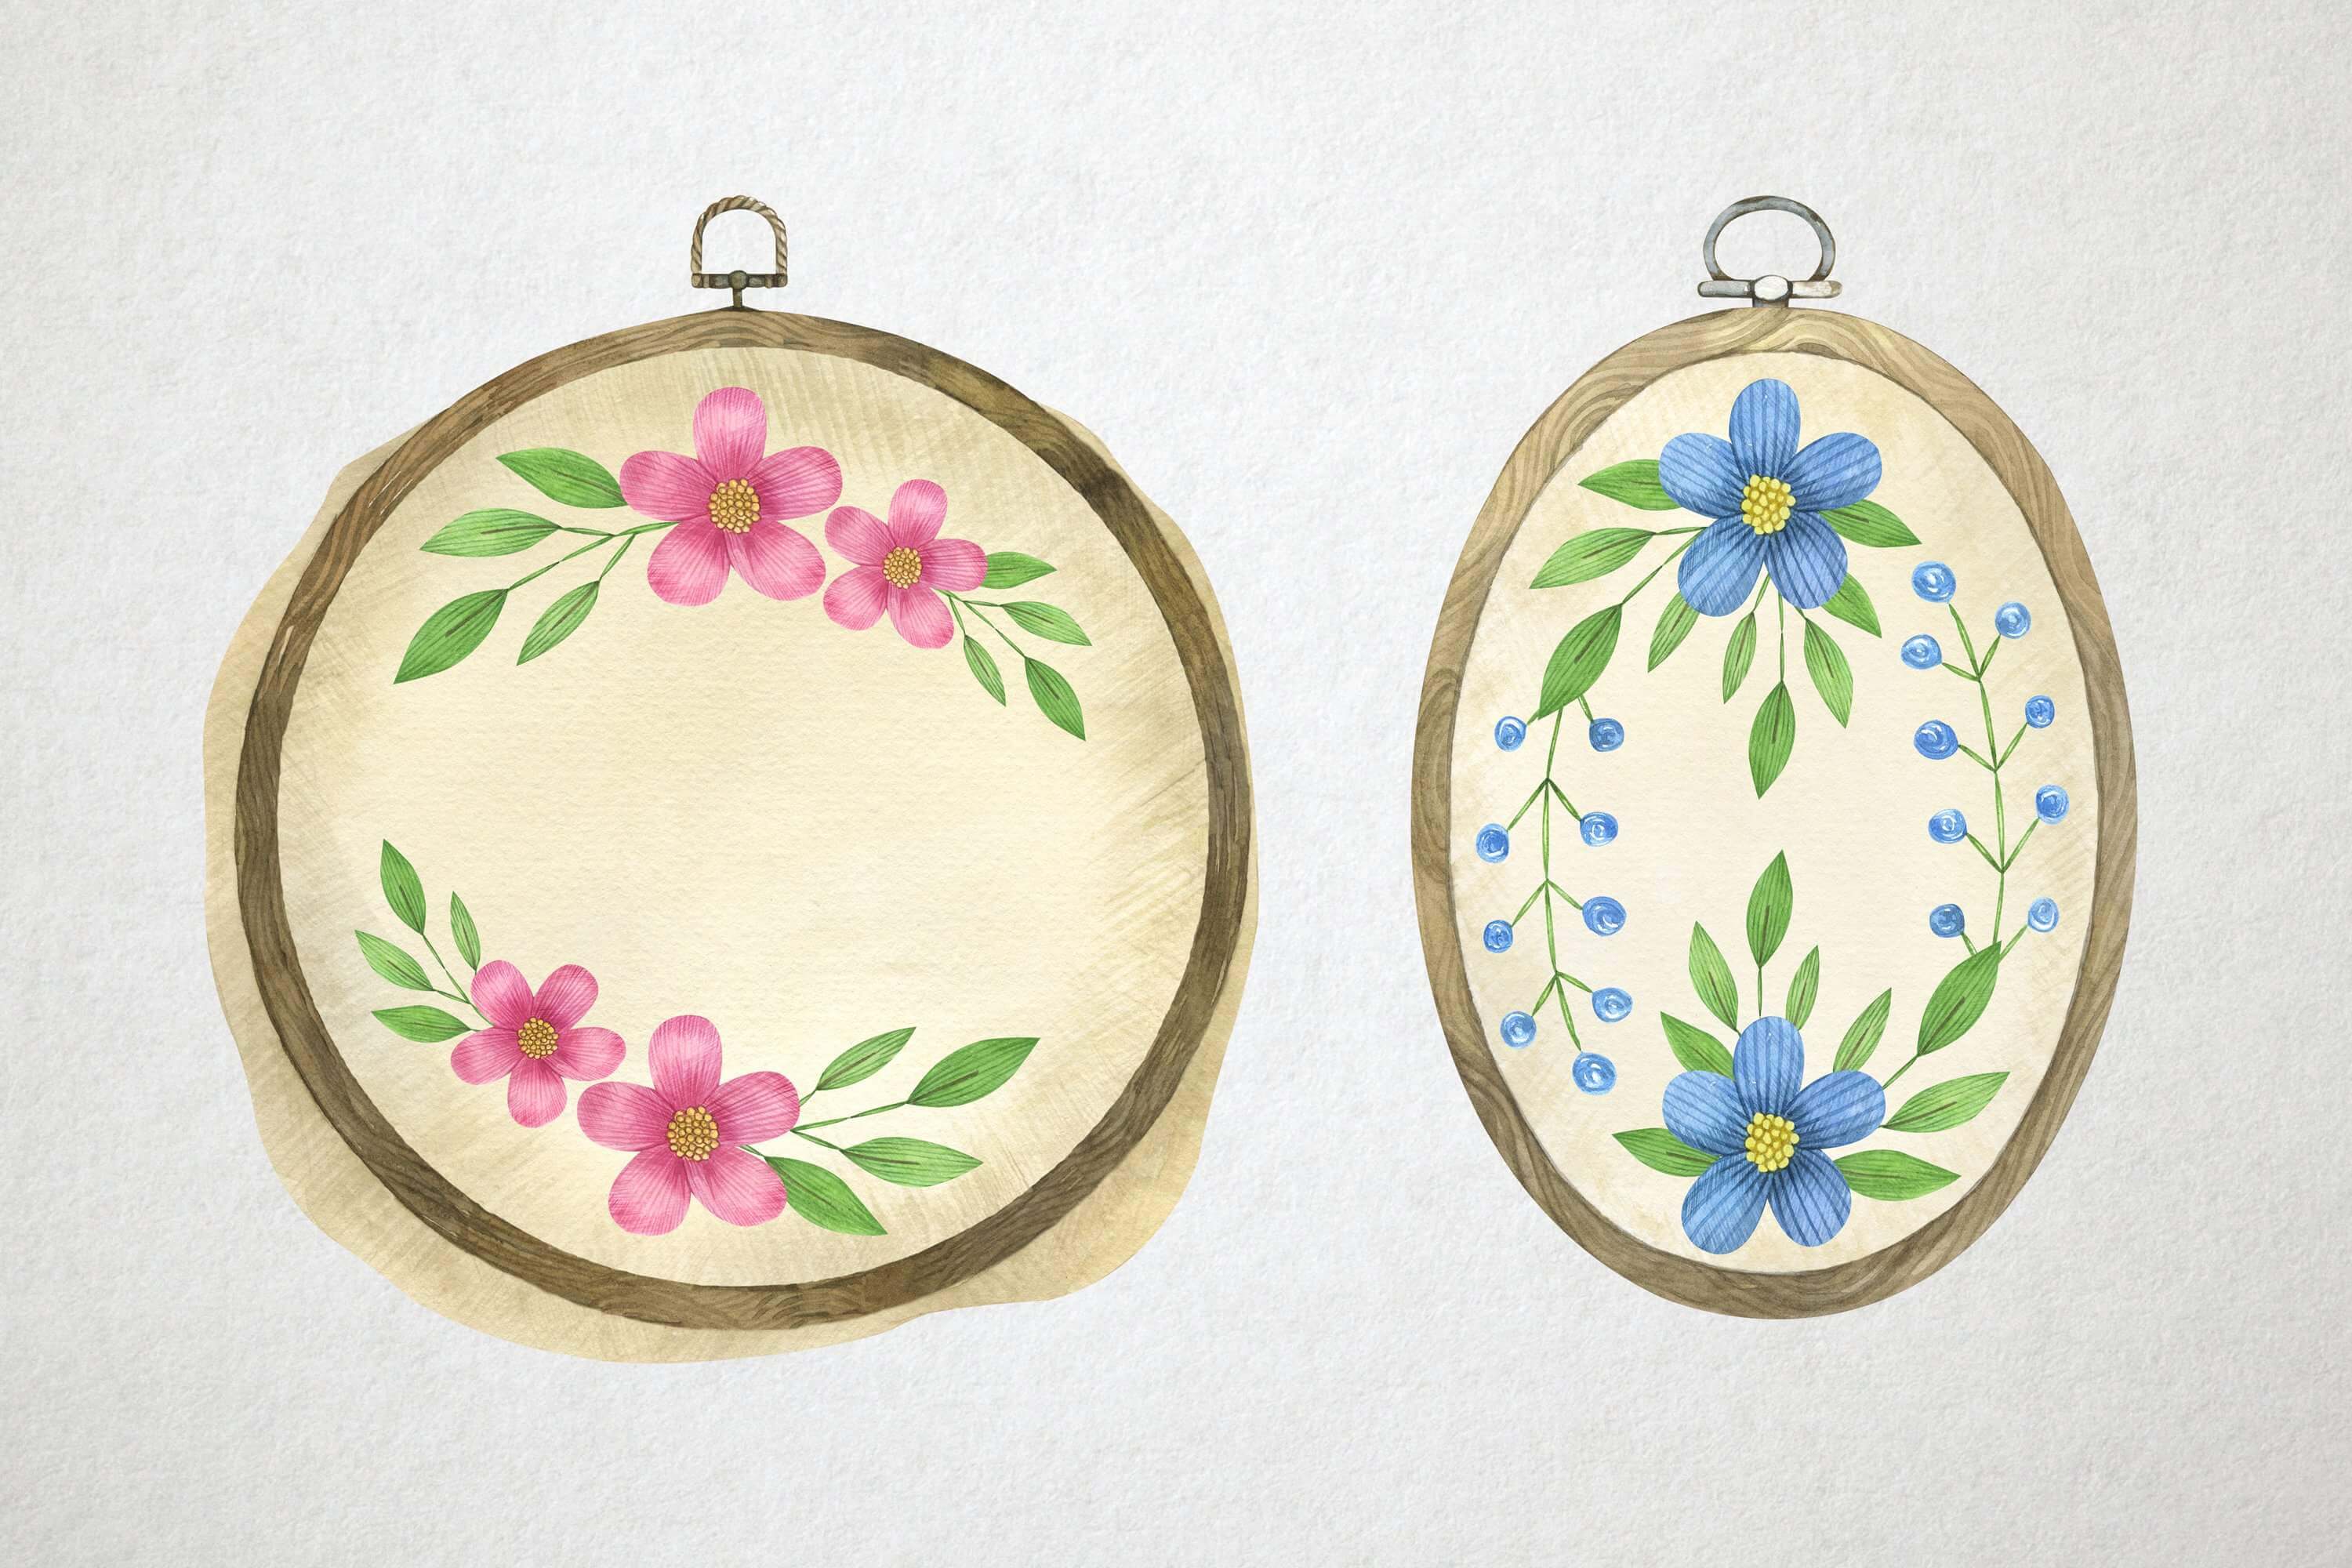 Watercolor image of two hoops inside which flowers are embroidered on the fabric.